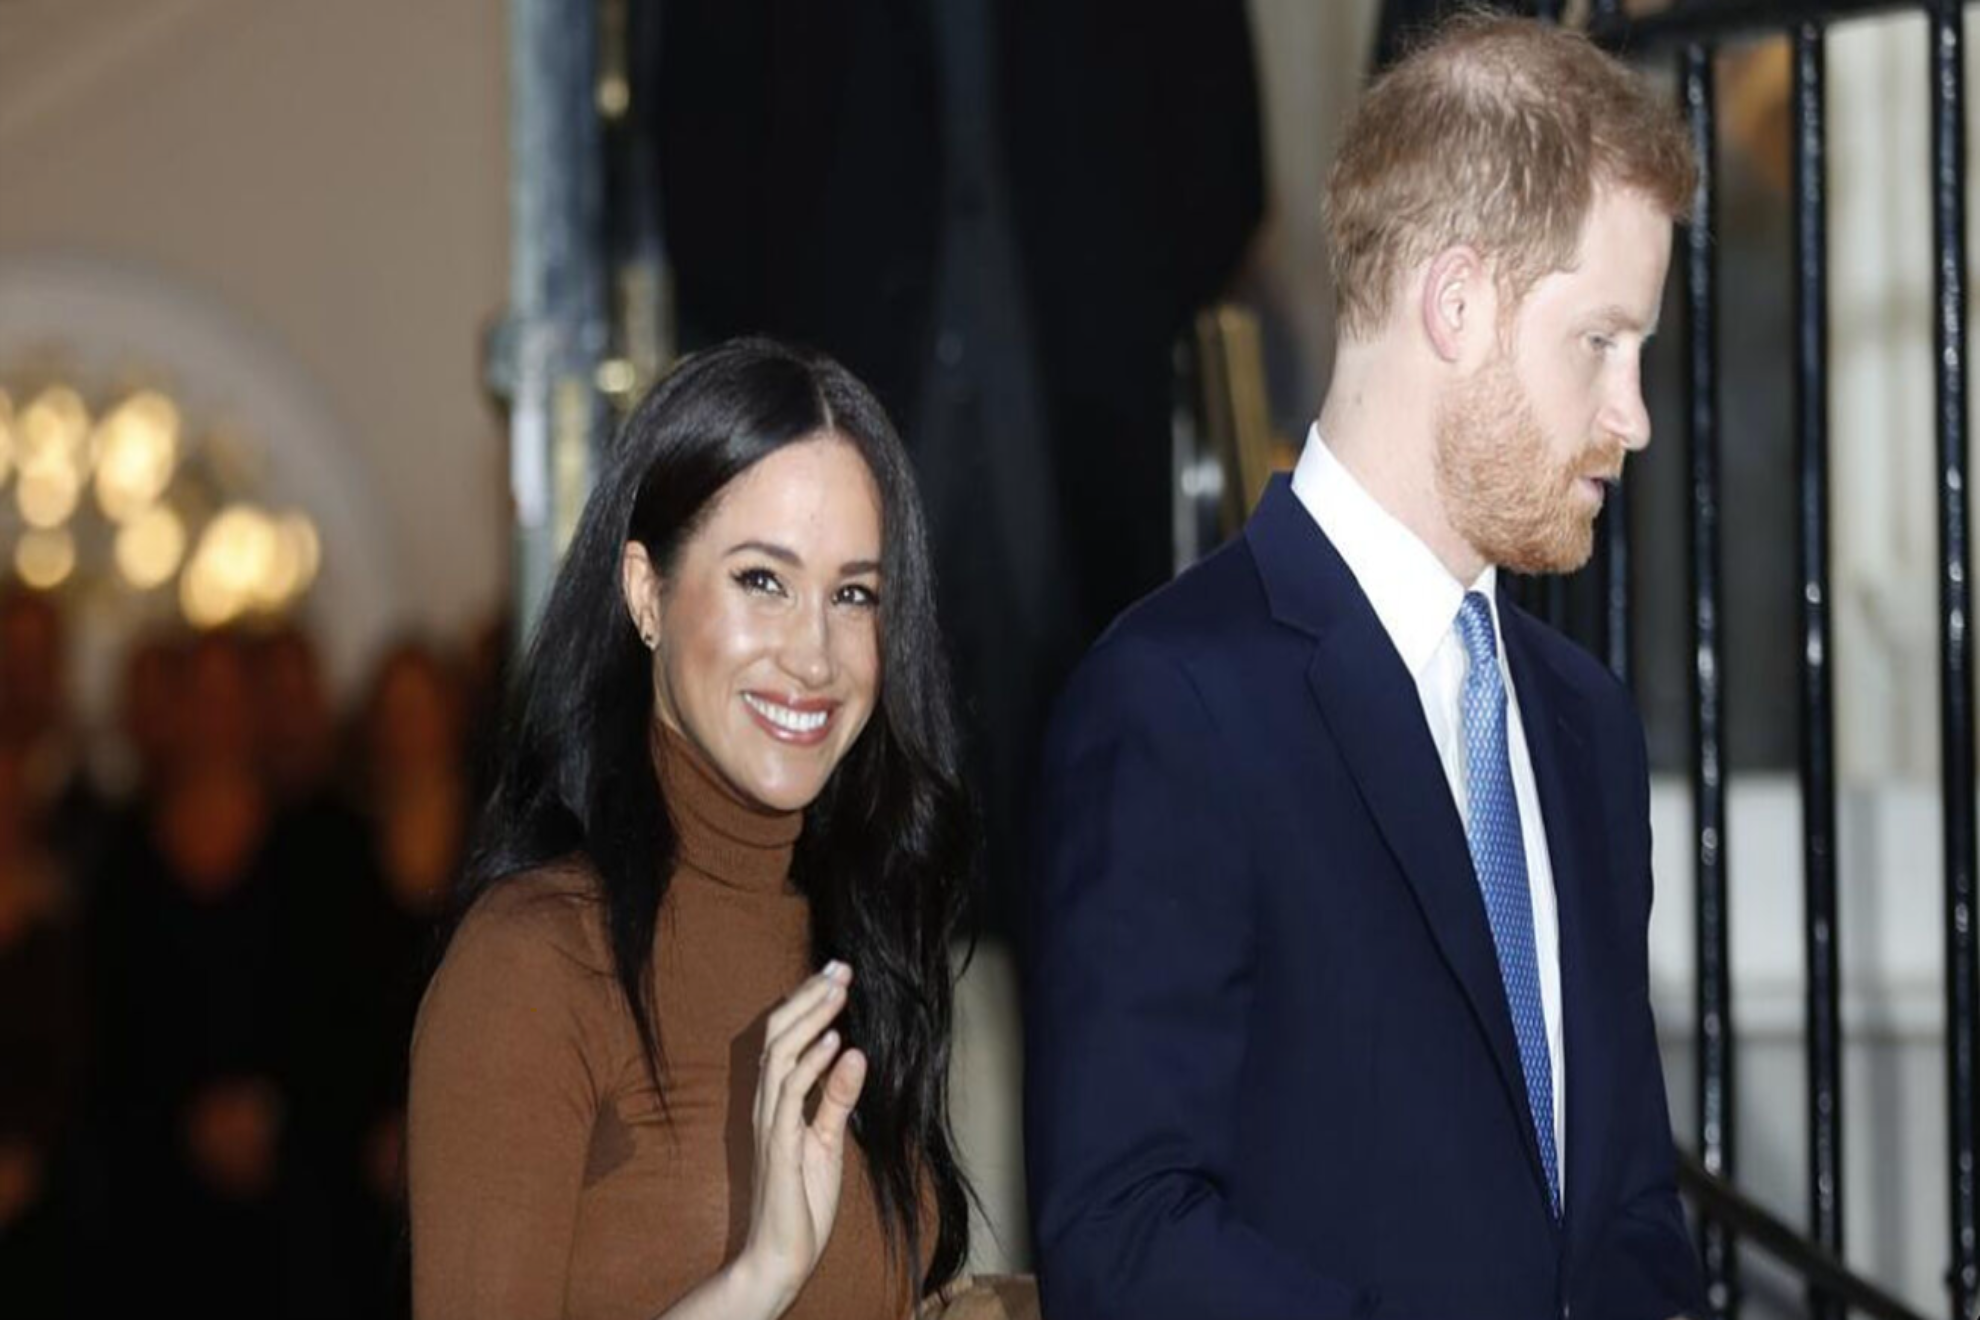 Meghan Markle sparked Beckham feud by 'manipulating' Prince Harry, former friend says